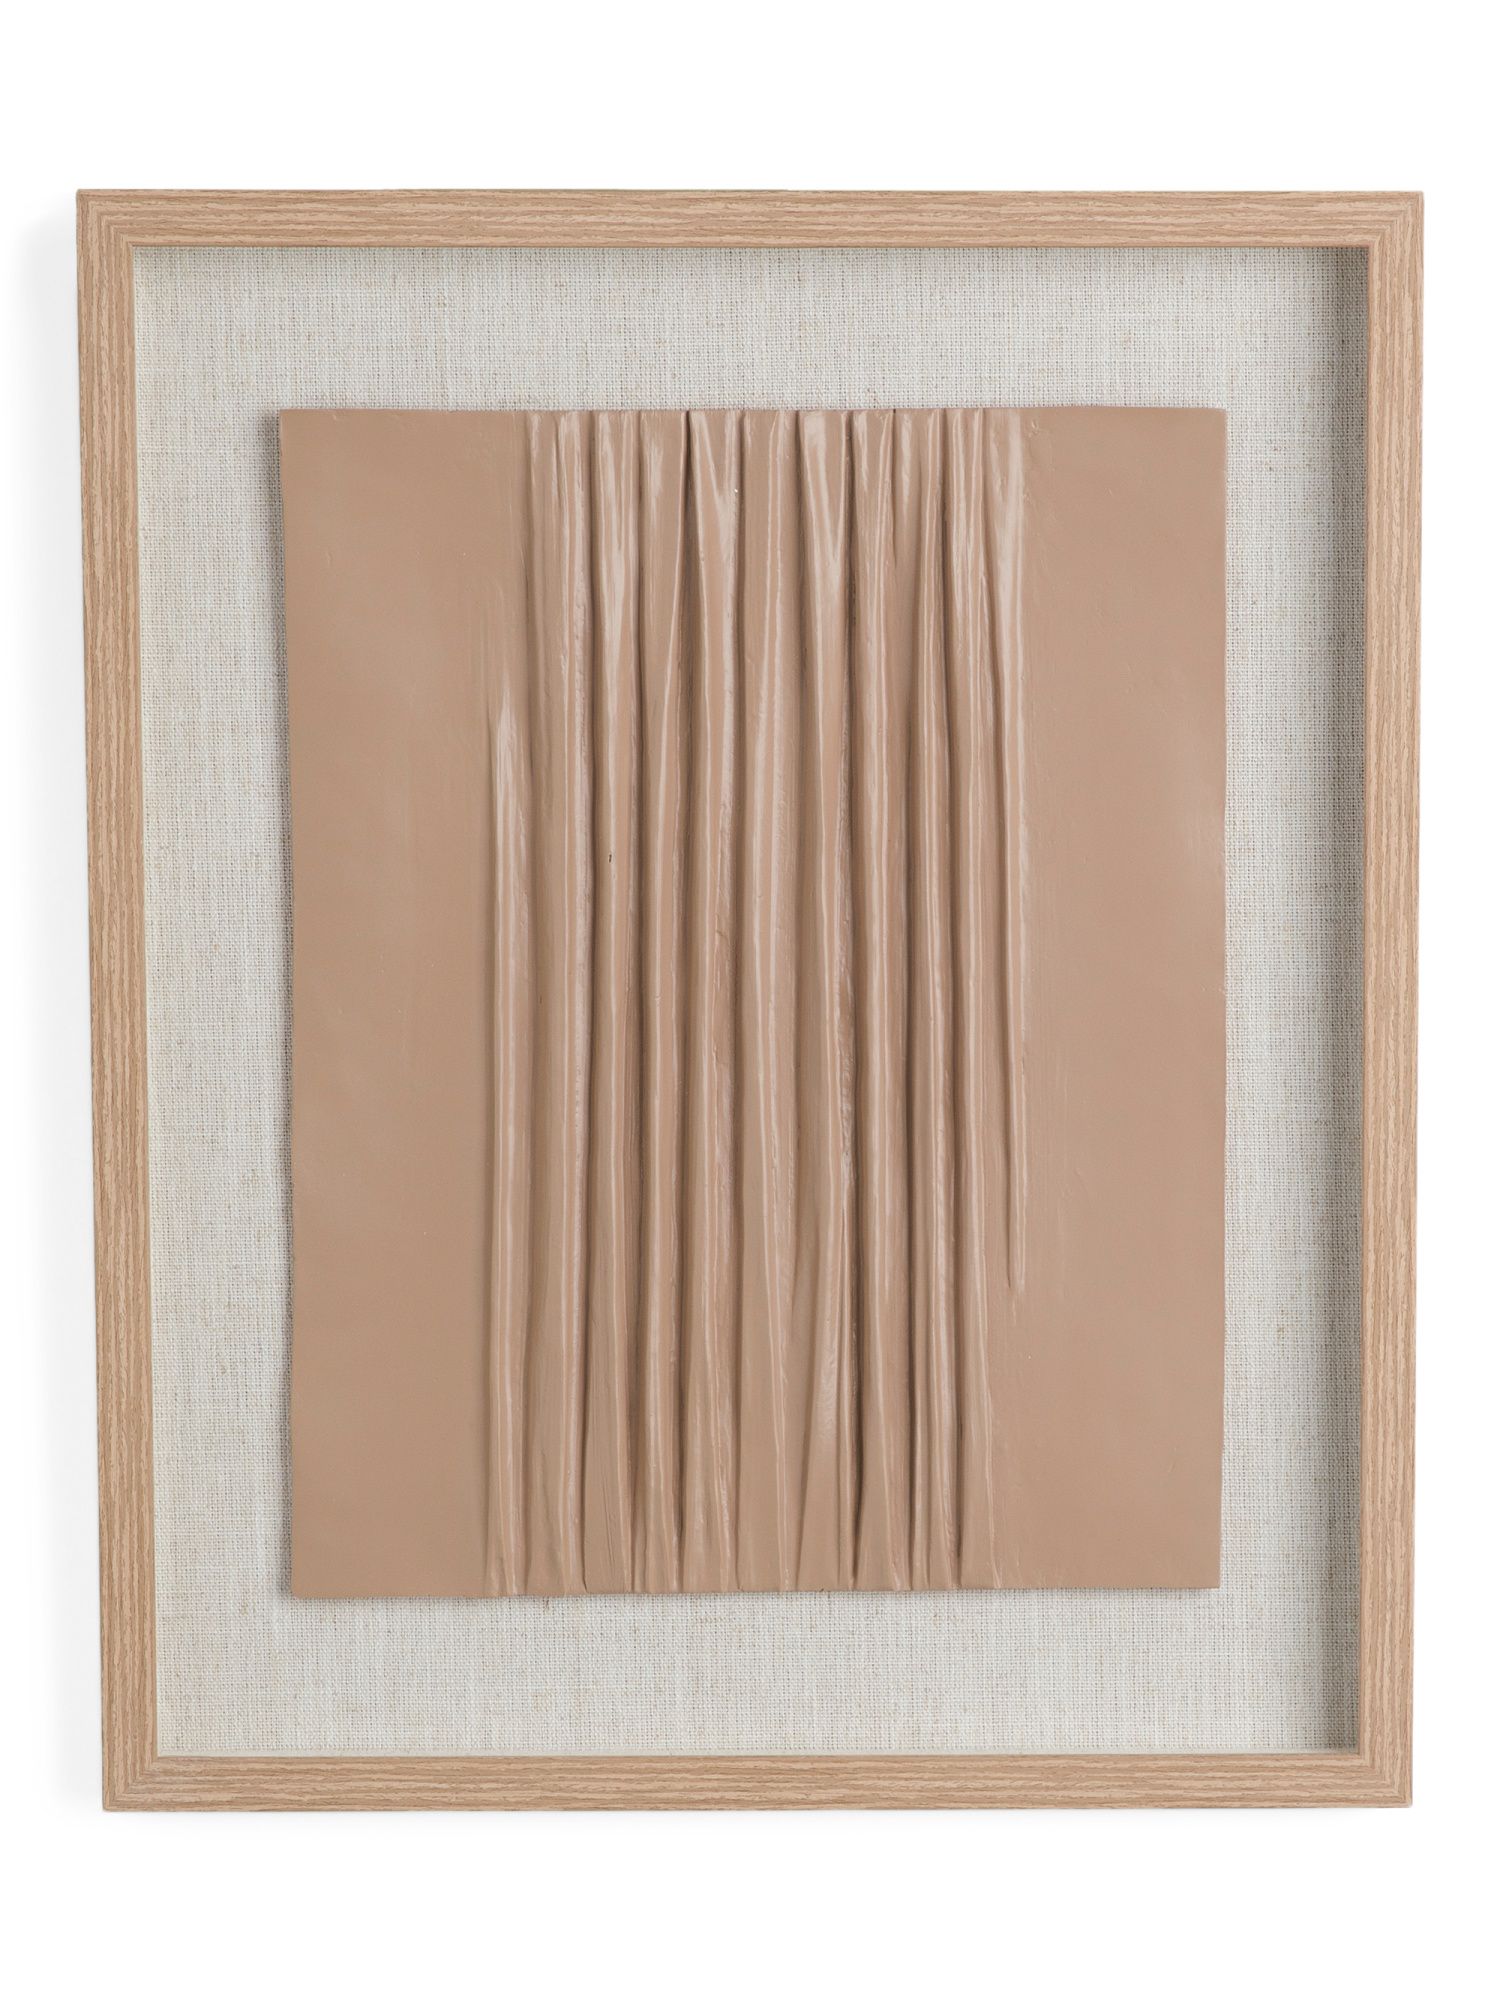 18x22 Brown Resin With Light Brown Framed Wall Art | TJ Maxx